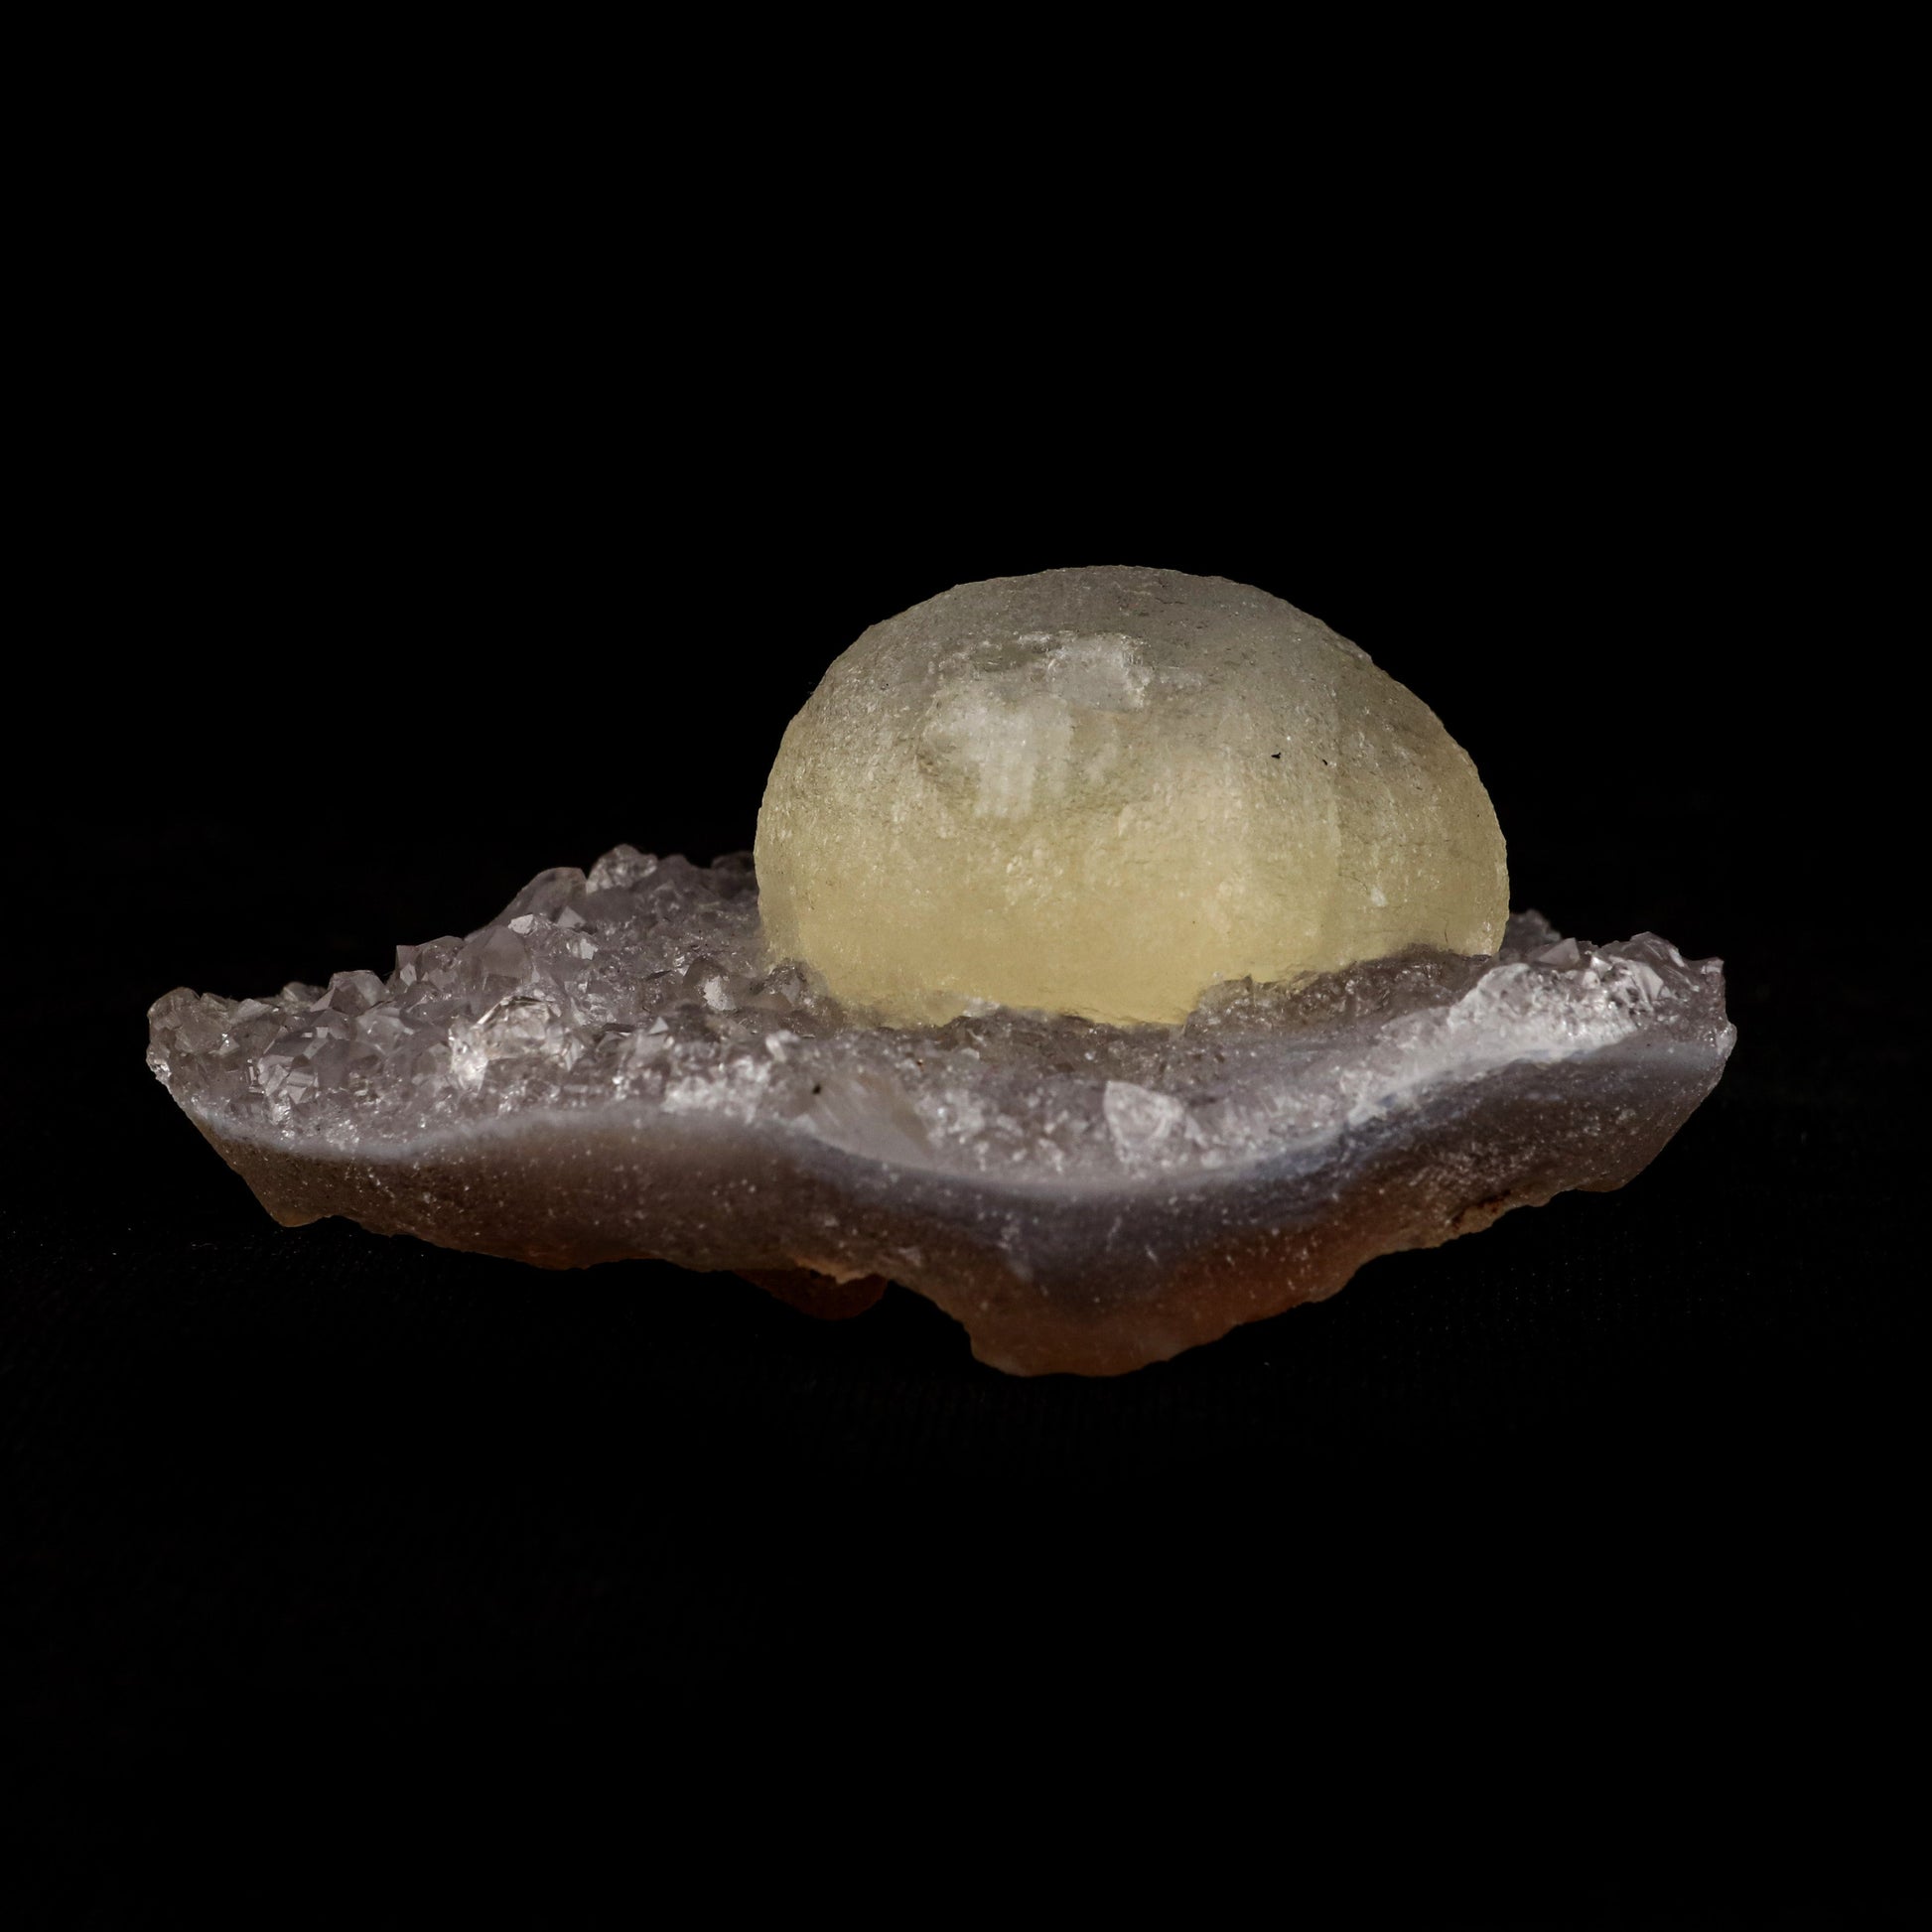 Fluorite Botryoidal on MM Quartz Natural Mineral Specimen # B 5068  https://www.superbminerals.us/products/fluorite-botryoidal-on-mm-quartz-natural-mineral-specimen-b-5068  Features: A beautiful across botryoidal fluorite, perched like a fried egg as we fondly call themn on lustrous quartz crystals. Modern classics from India, these were more abundant a few years ago and not around as much now. Primary Mineral(s): Fluorite